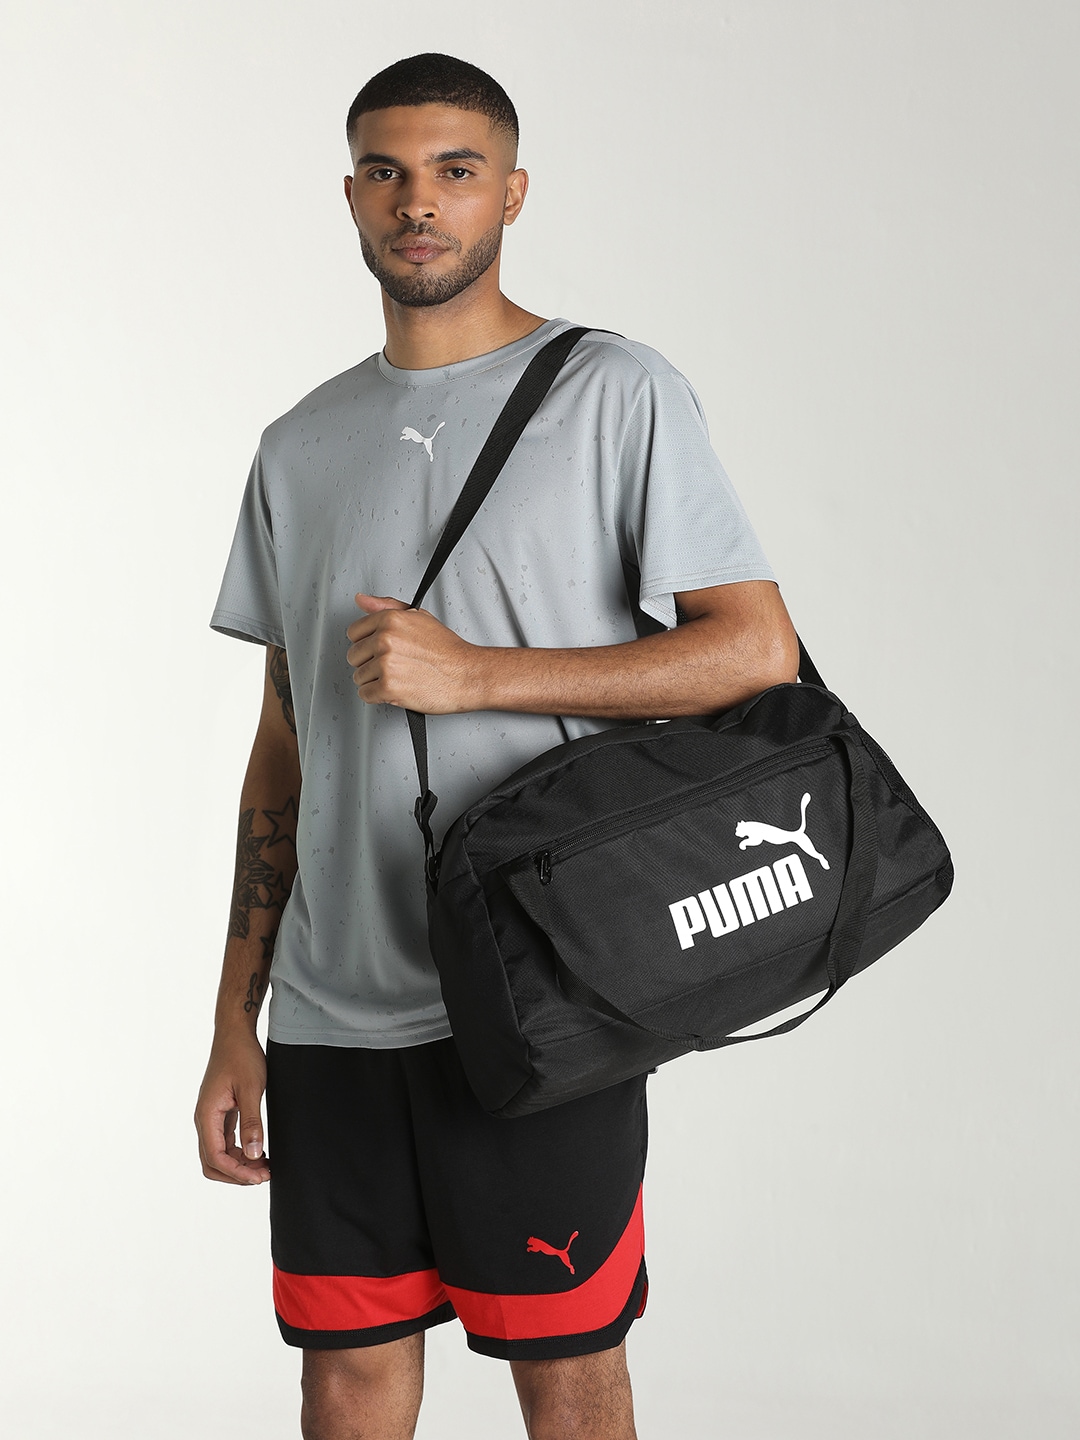 Puma Unisex Black Solid Phase Sports Duffel Bag Price in India